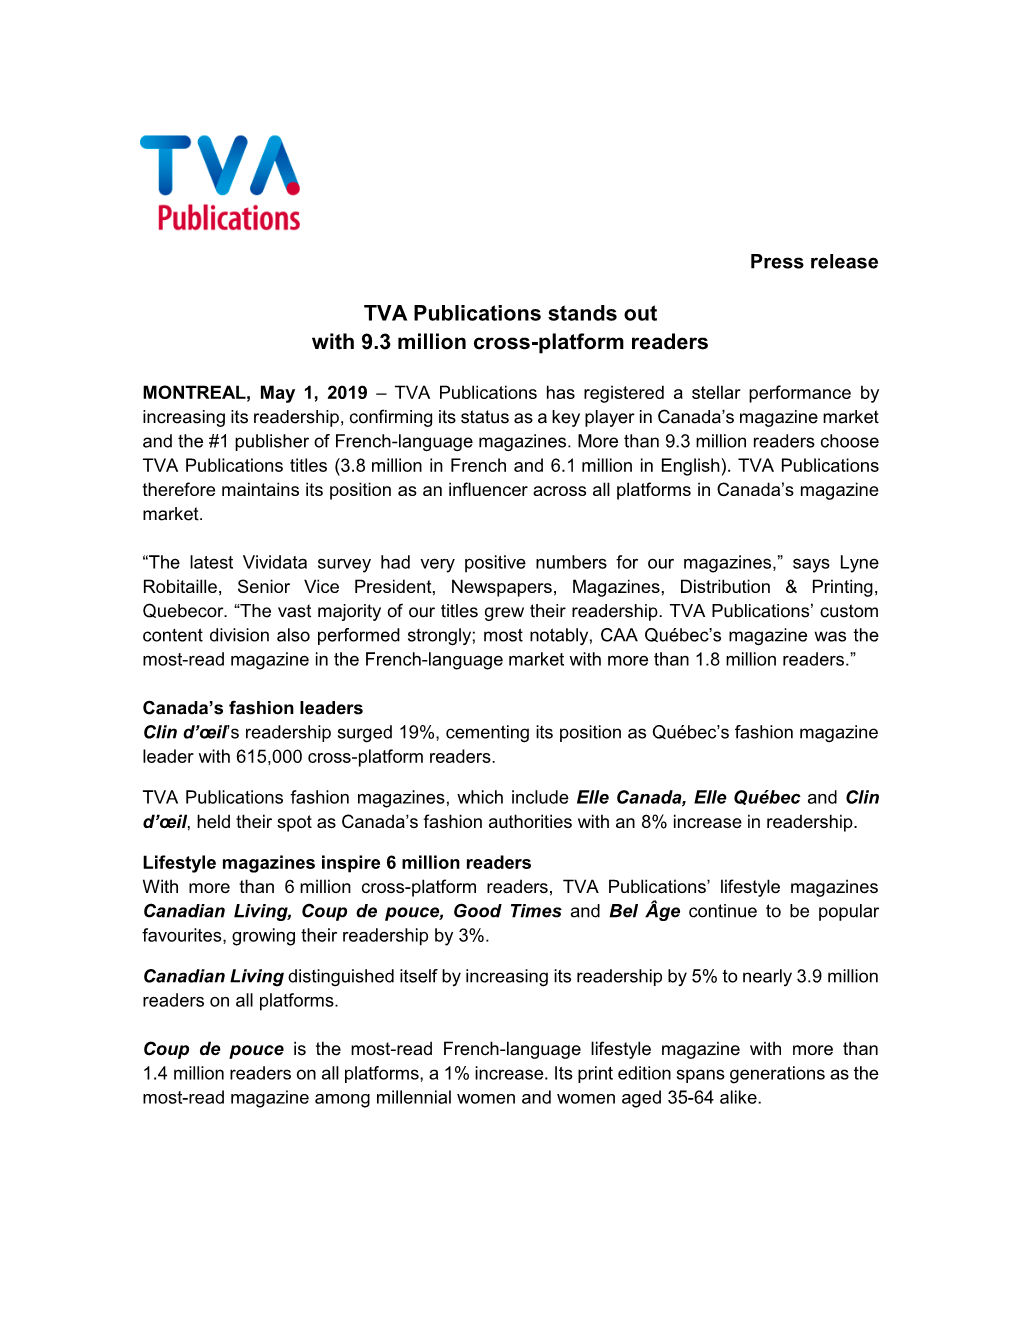 TVA Publications Stands out with 9.3 Million Cross-Platform Readers